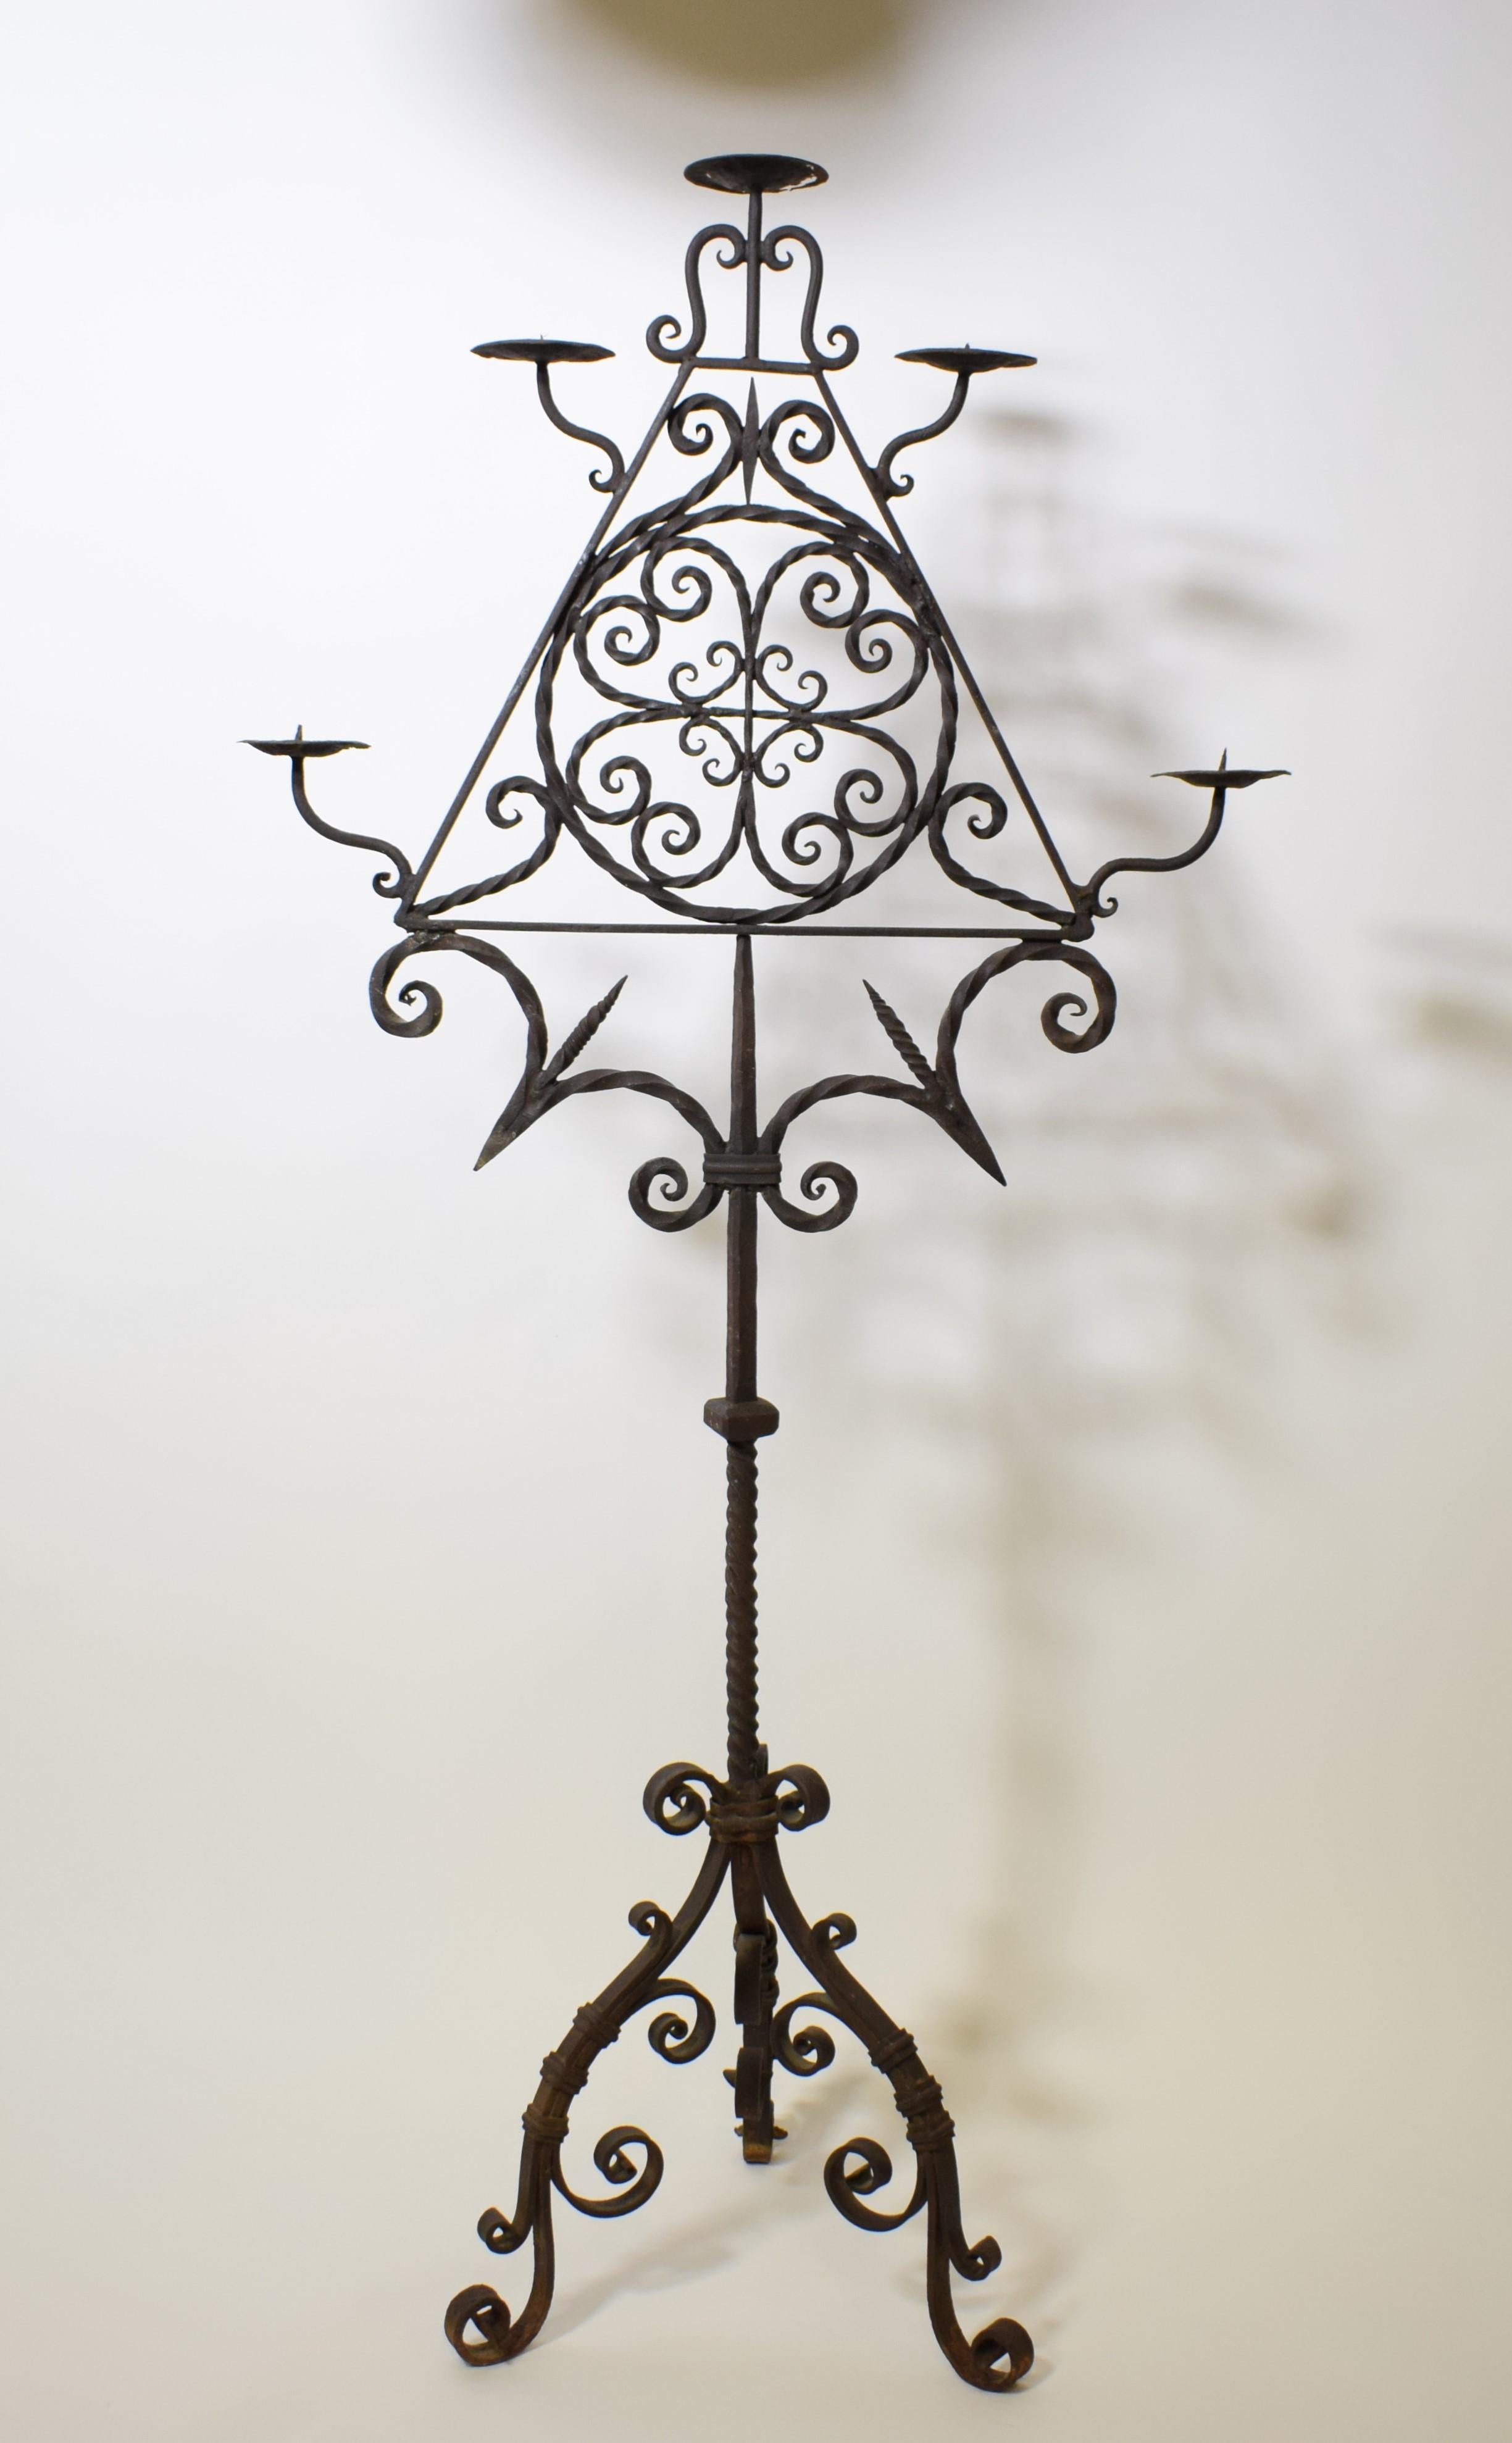 Late 19th century iron candelabrum. 
Dimensions: W 30